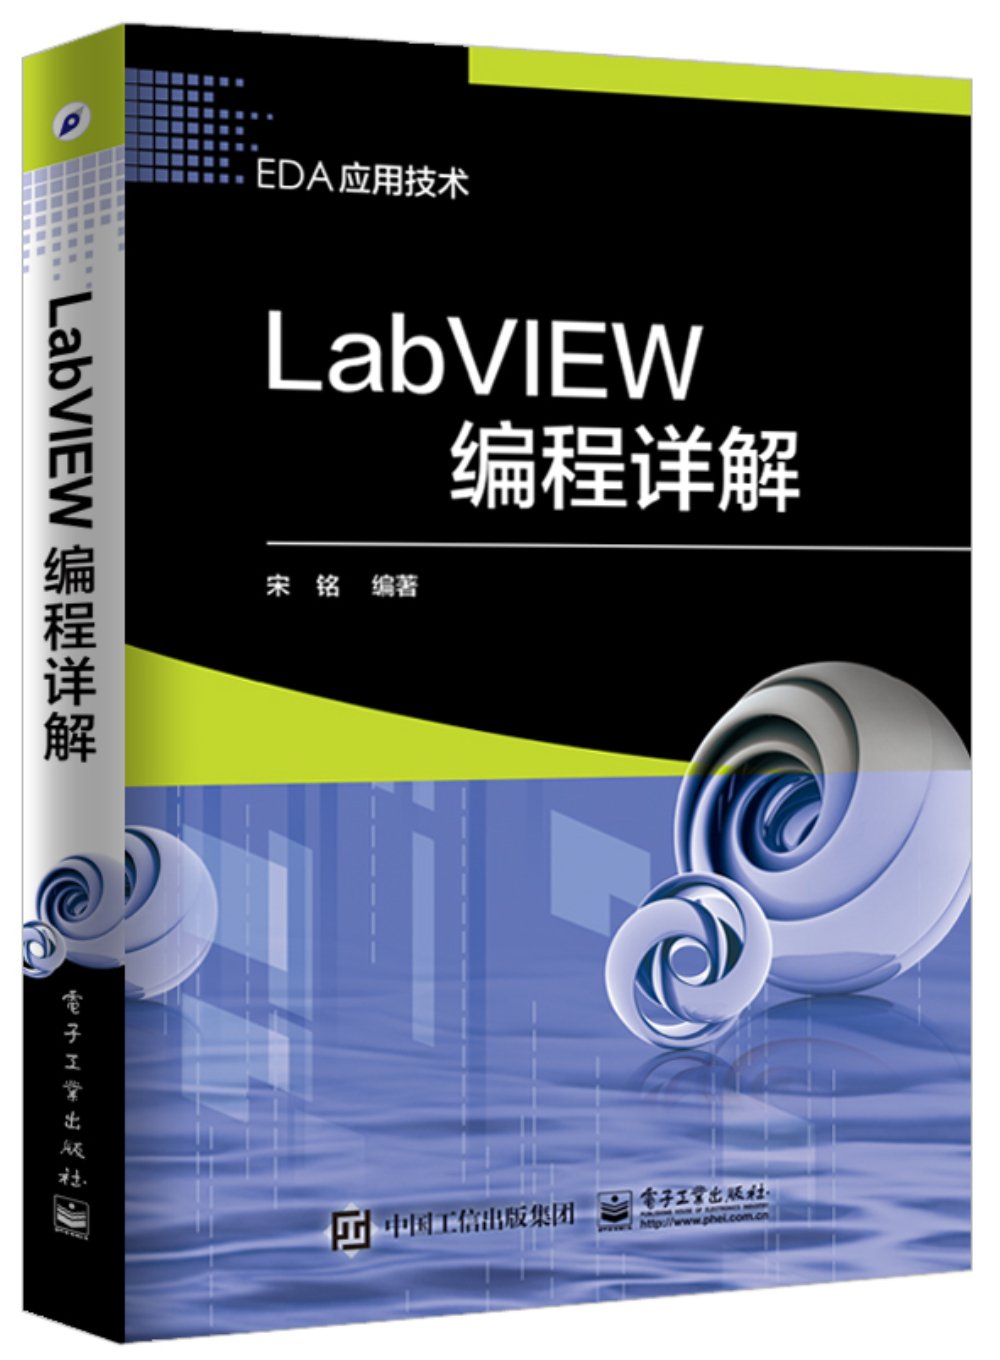 LabVIEW編程詳解